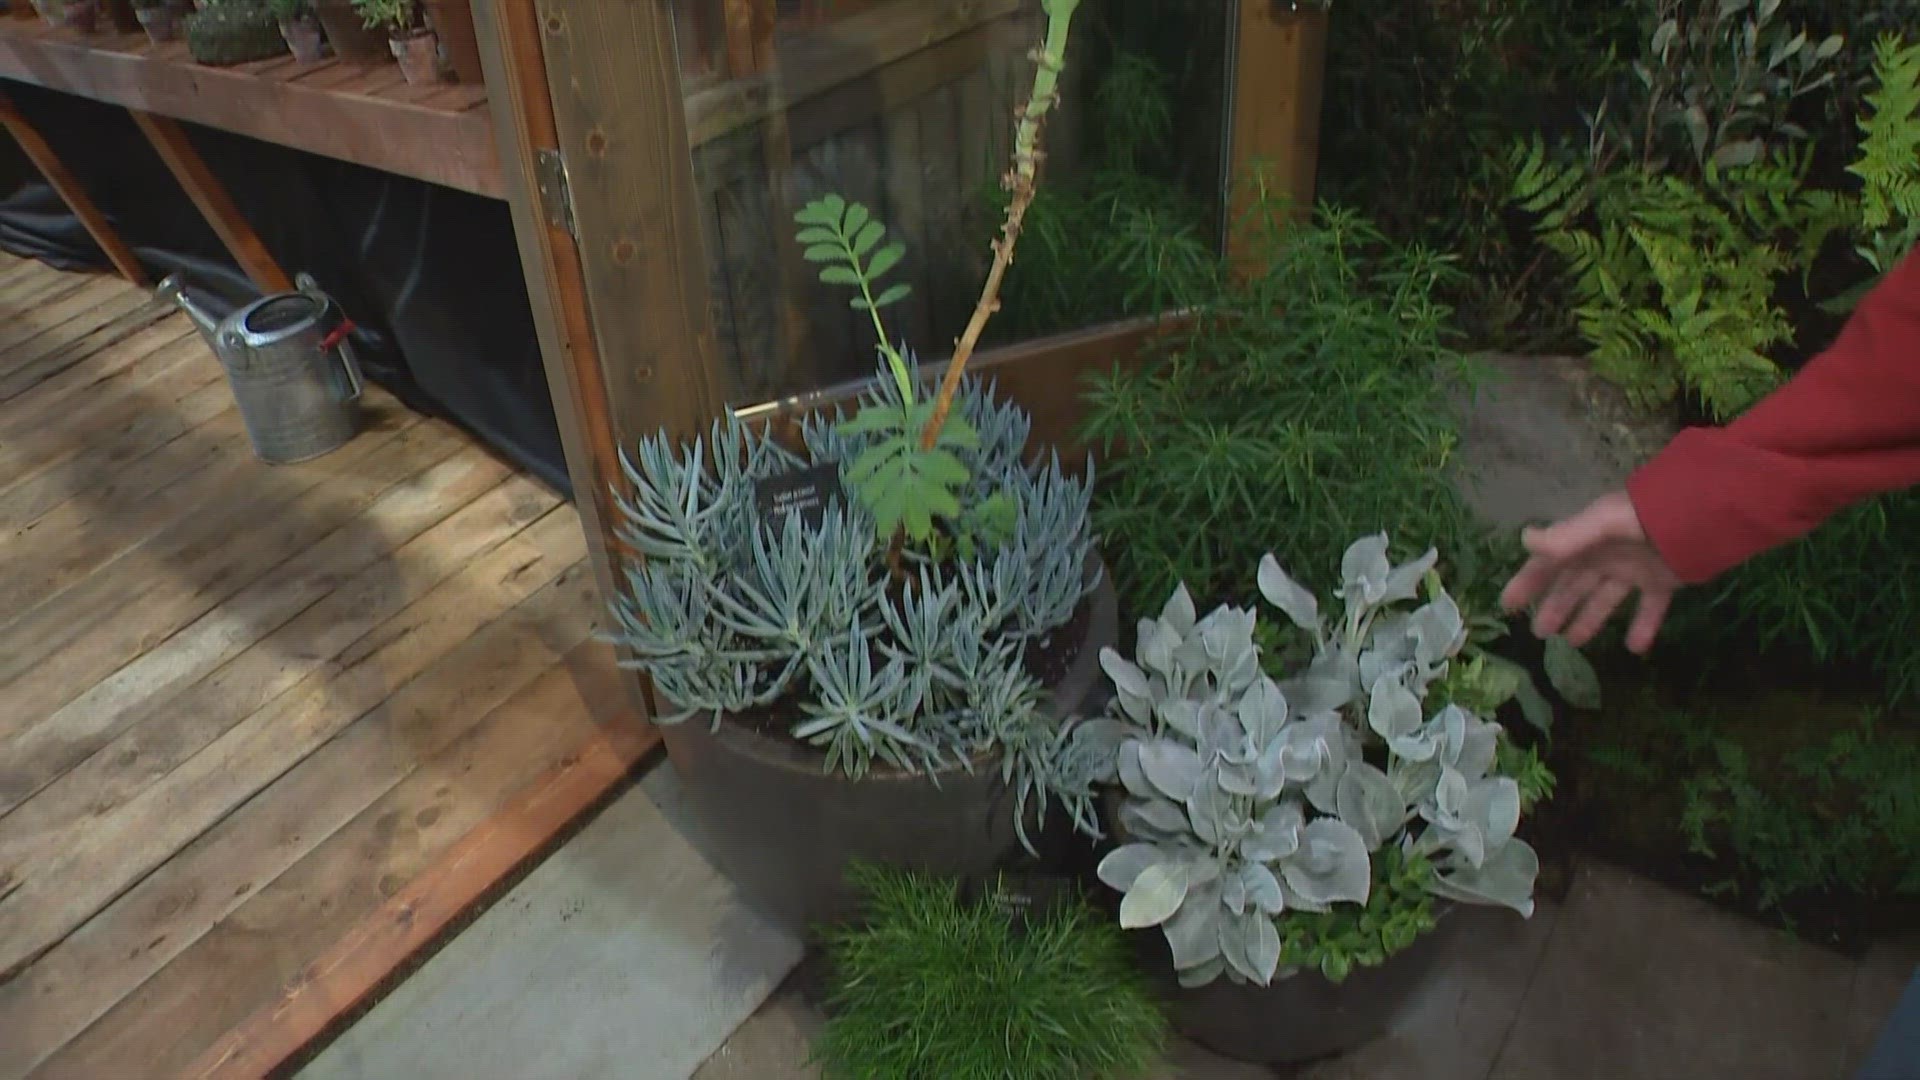 Gardening expert Ciscoe Morris discusses using potted plants to maximize space and answers a viewer question about pruning a cherry tree for the first time